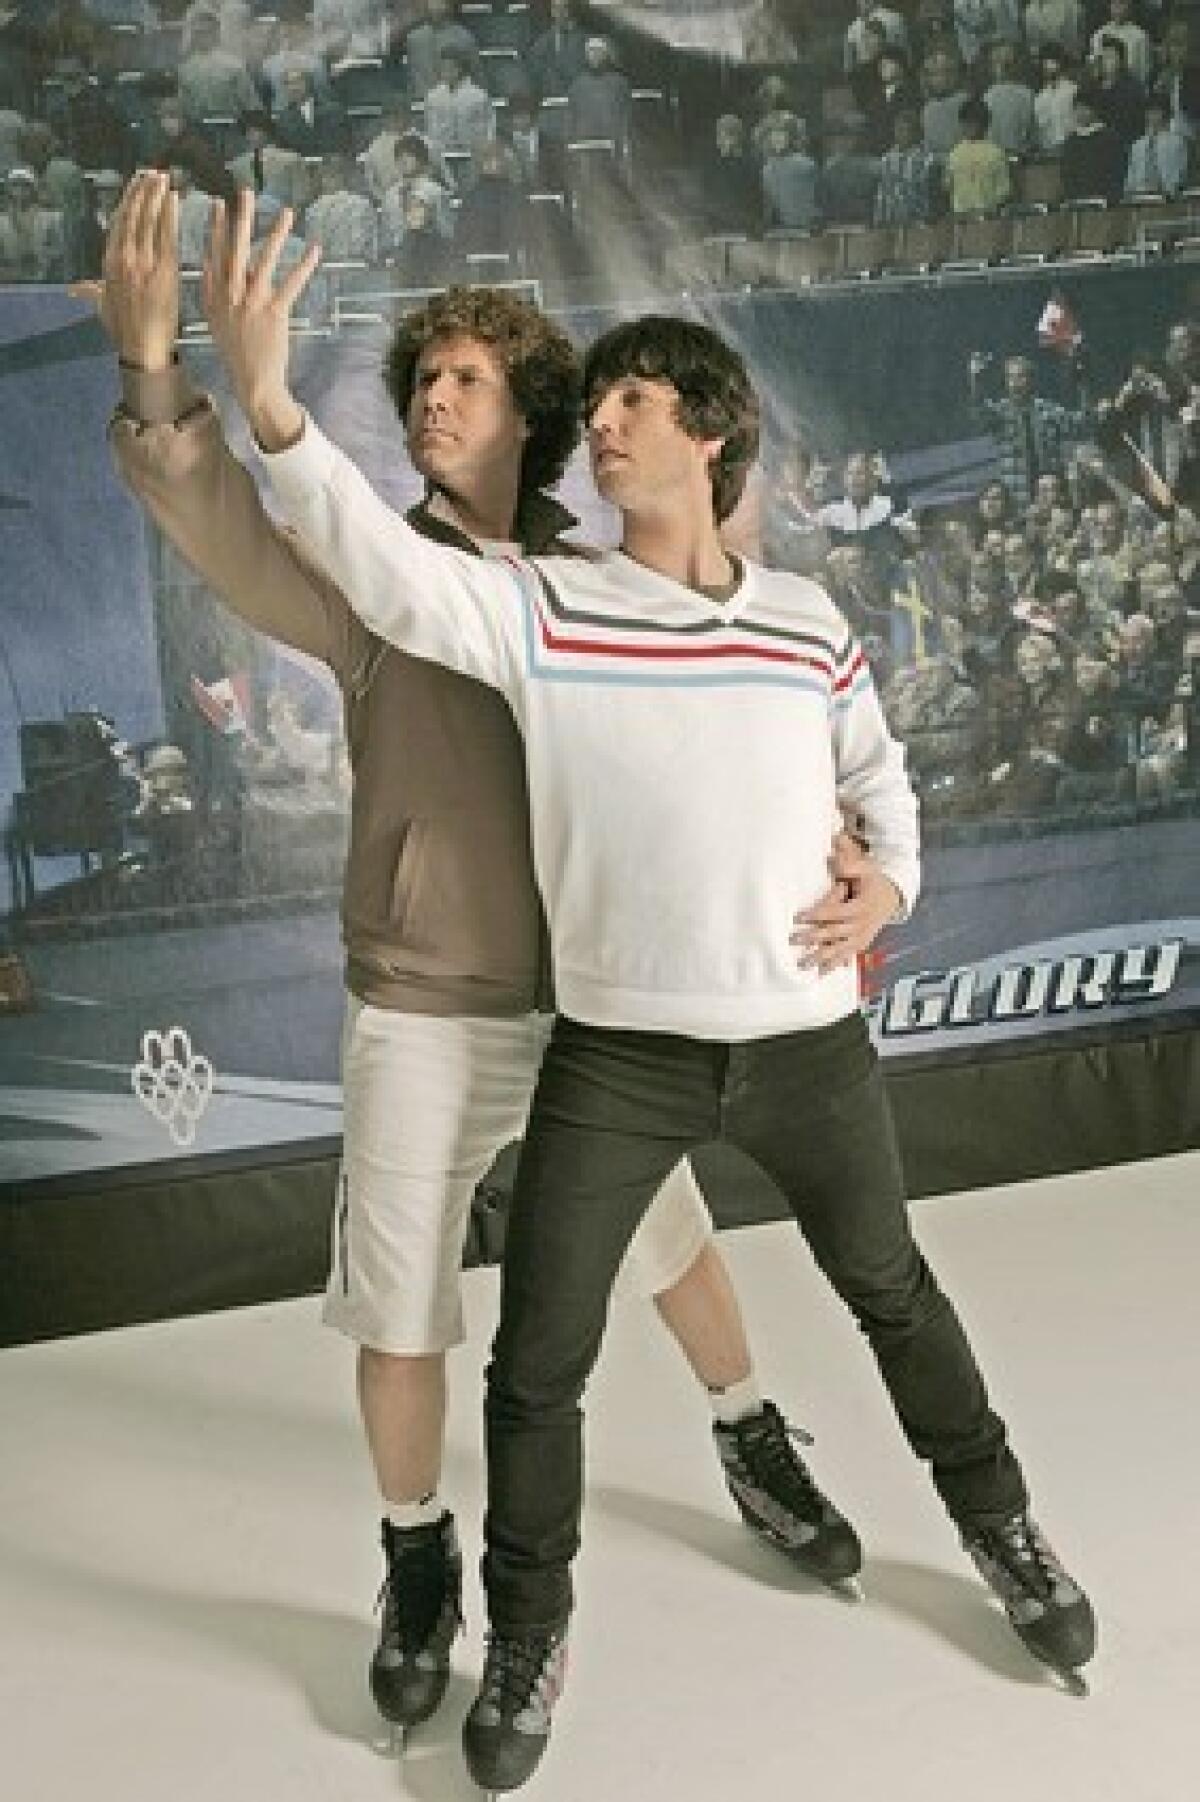 Will Ferrell, left, and Jon Heder